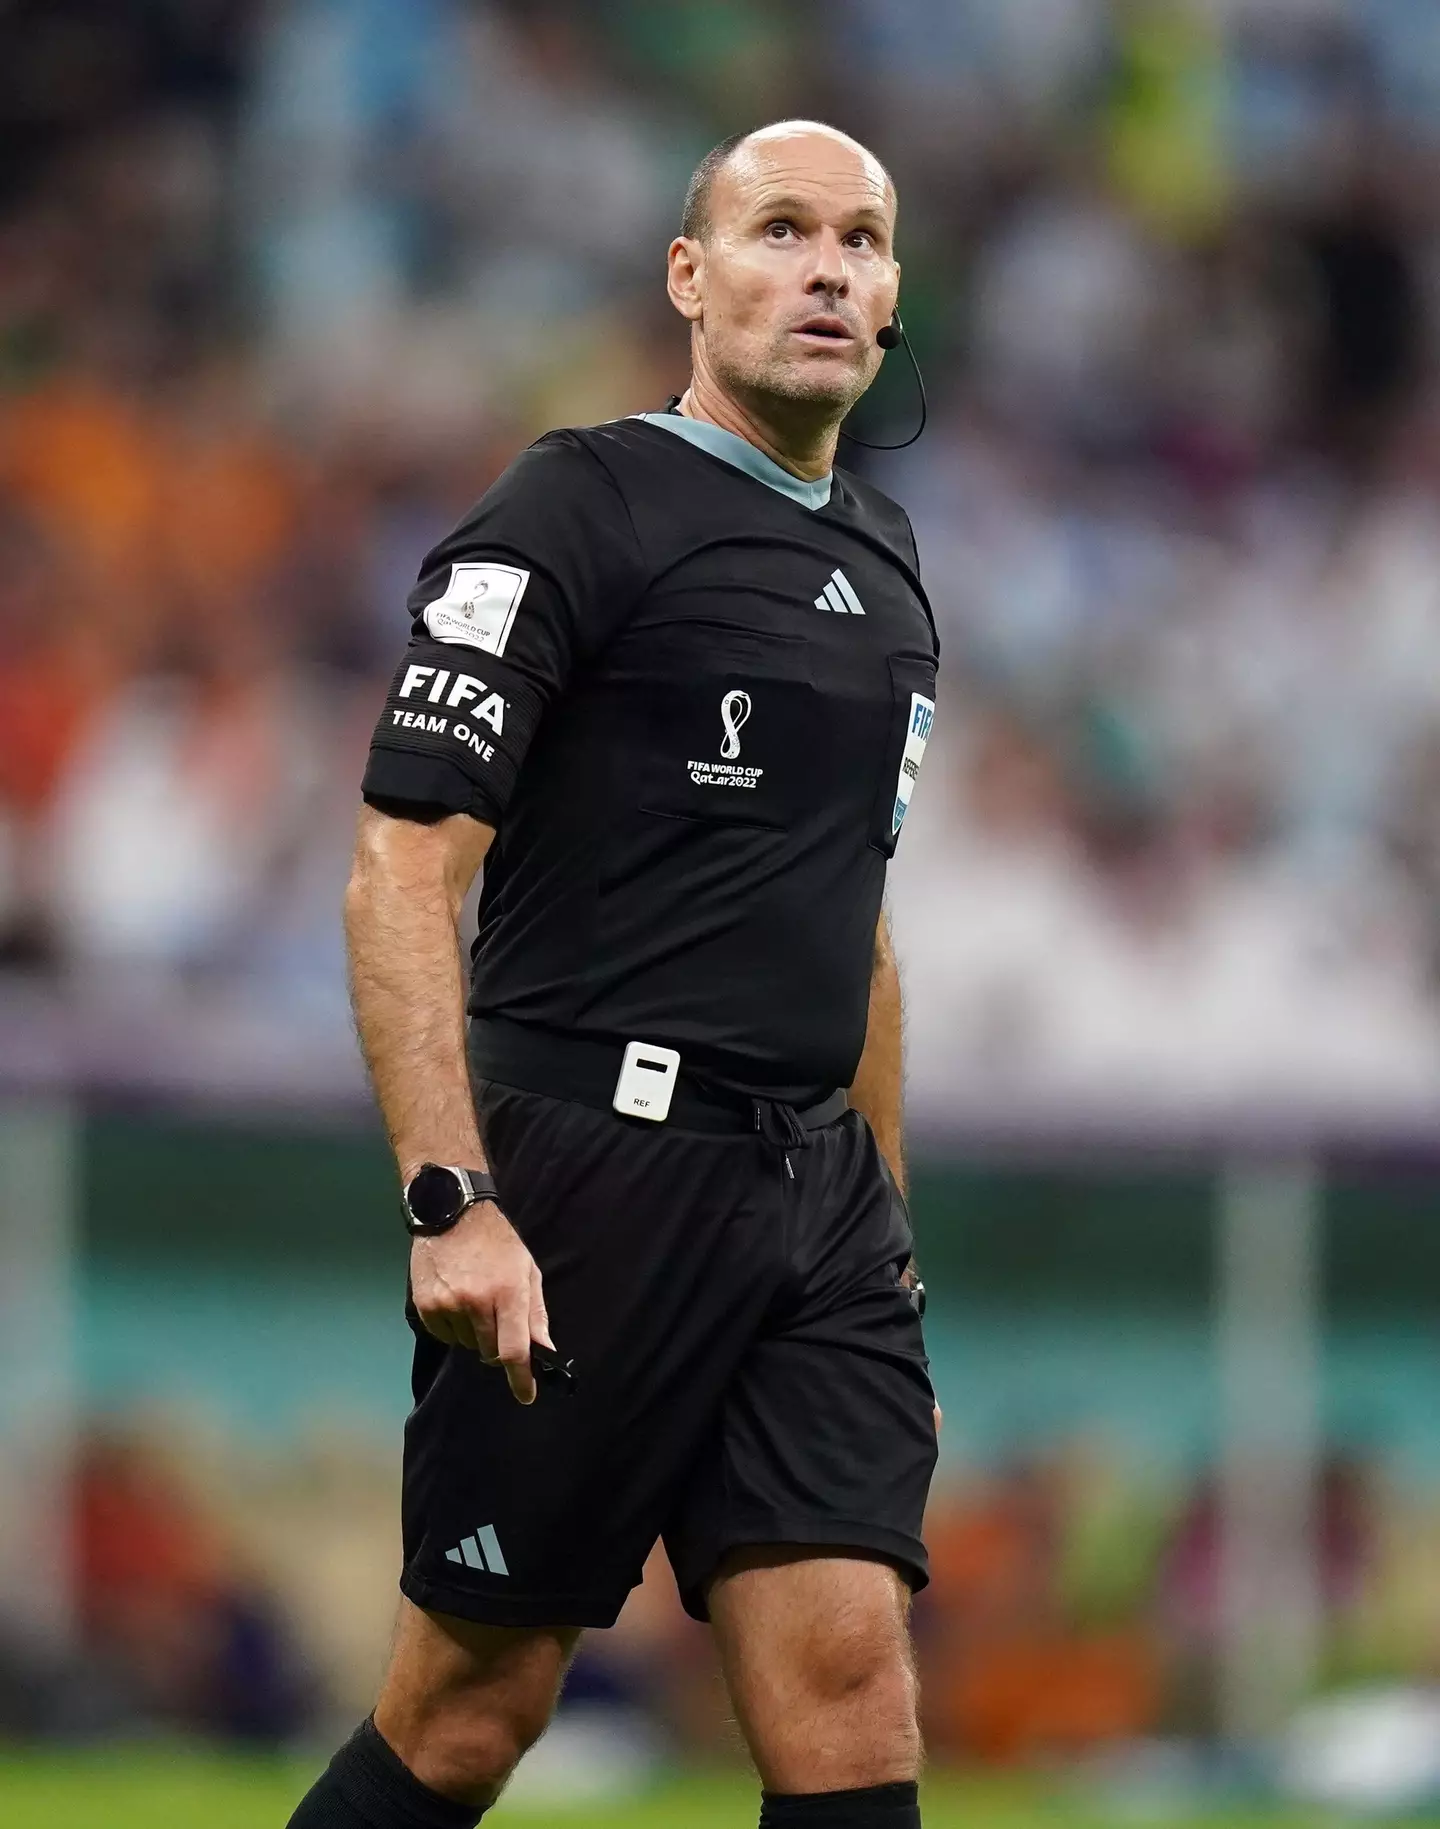 Referee Antonio Mateu Lahoz found himself in hot water after the game.